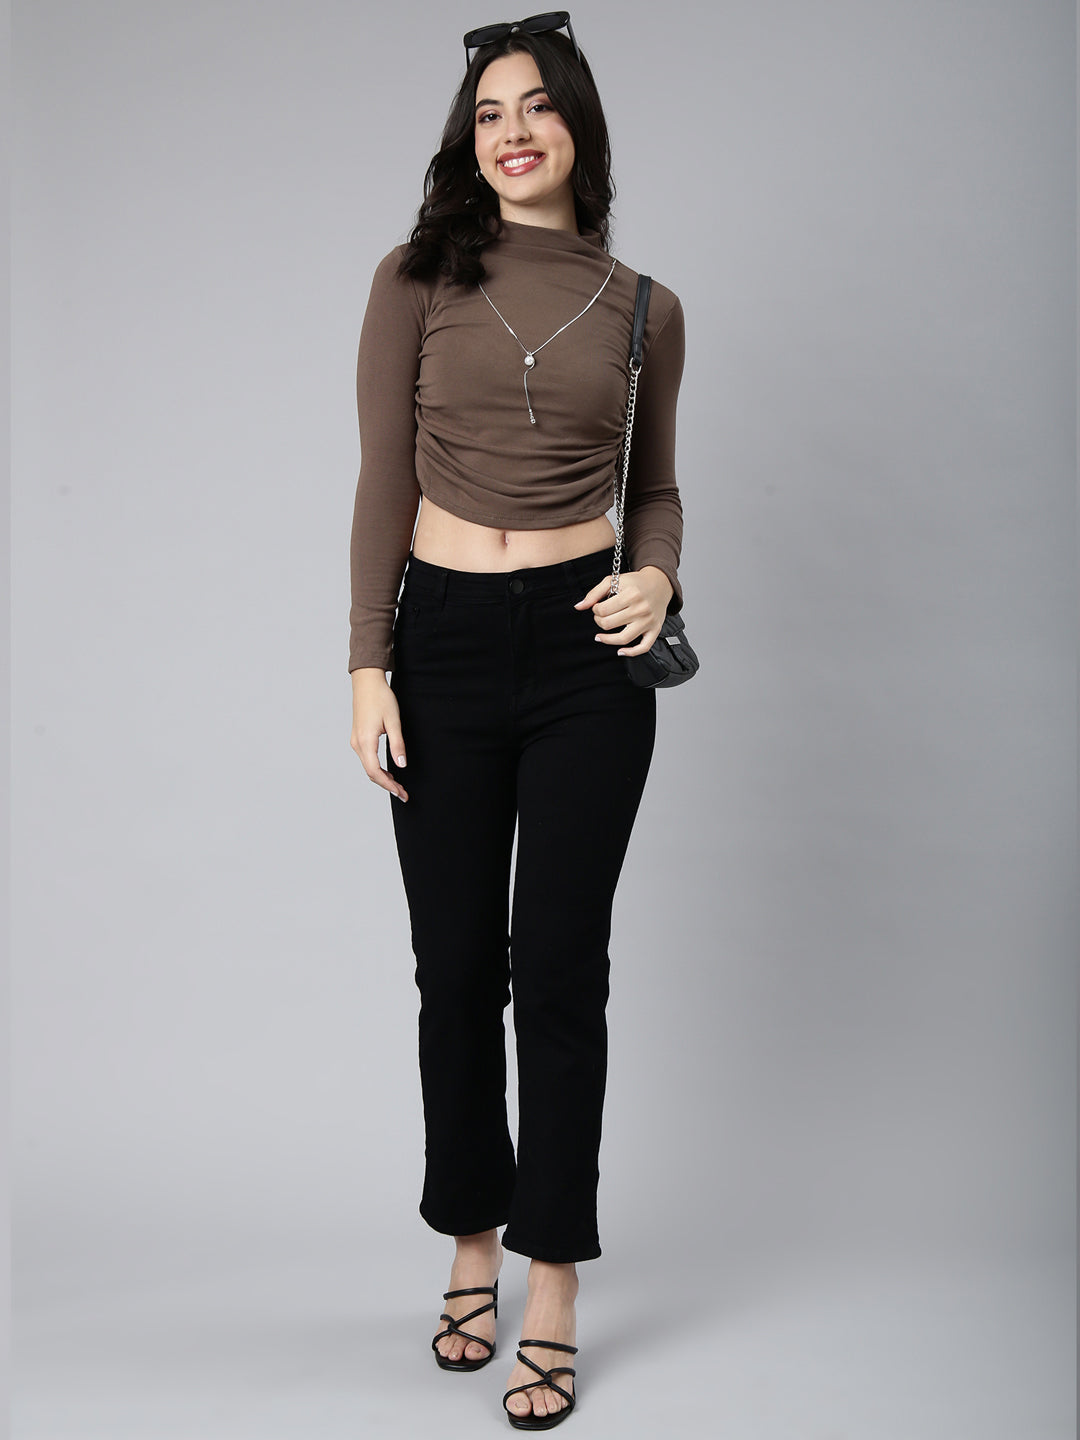 Women Solid Olive Fitted Top Comes with Neck Chain